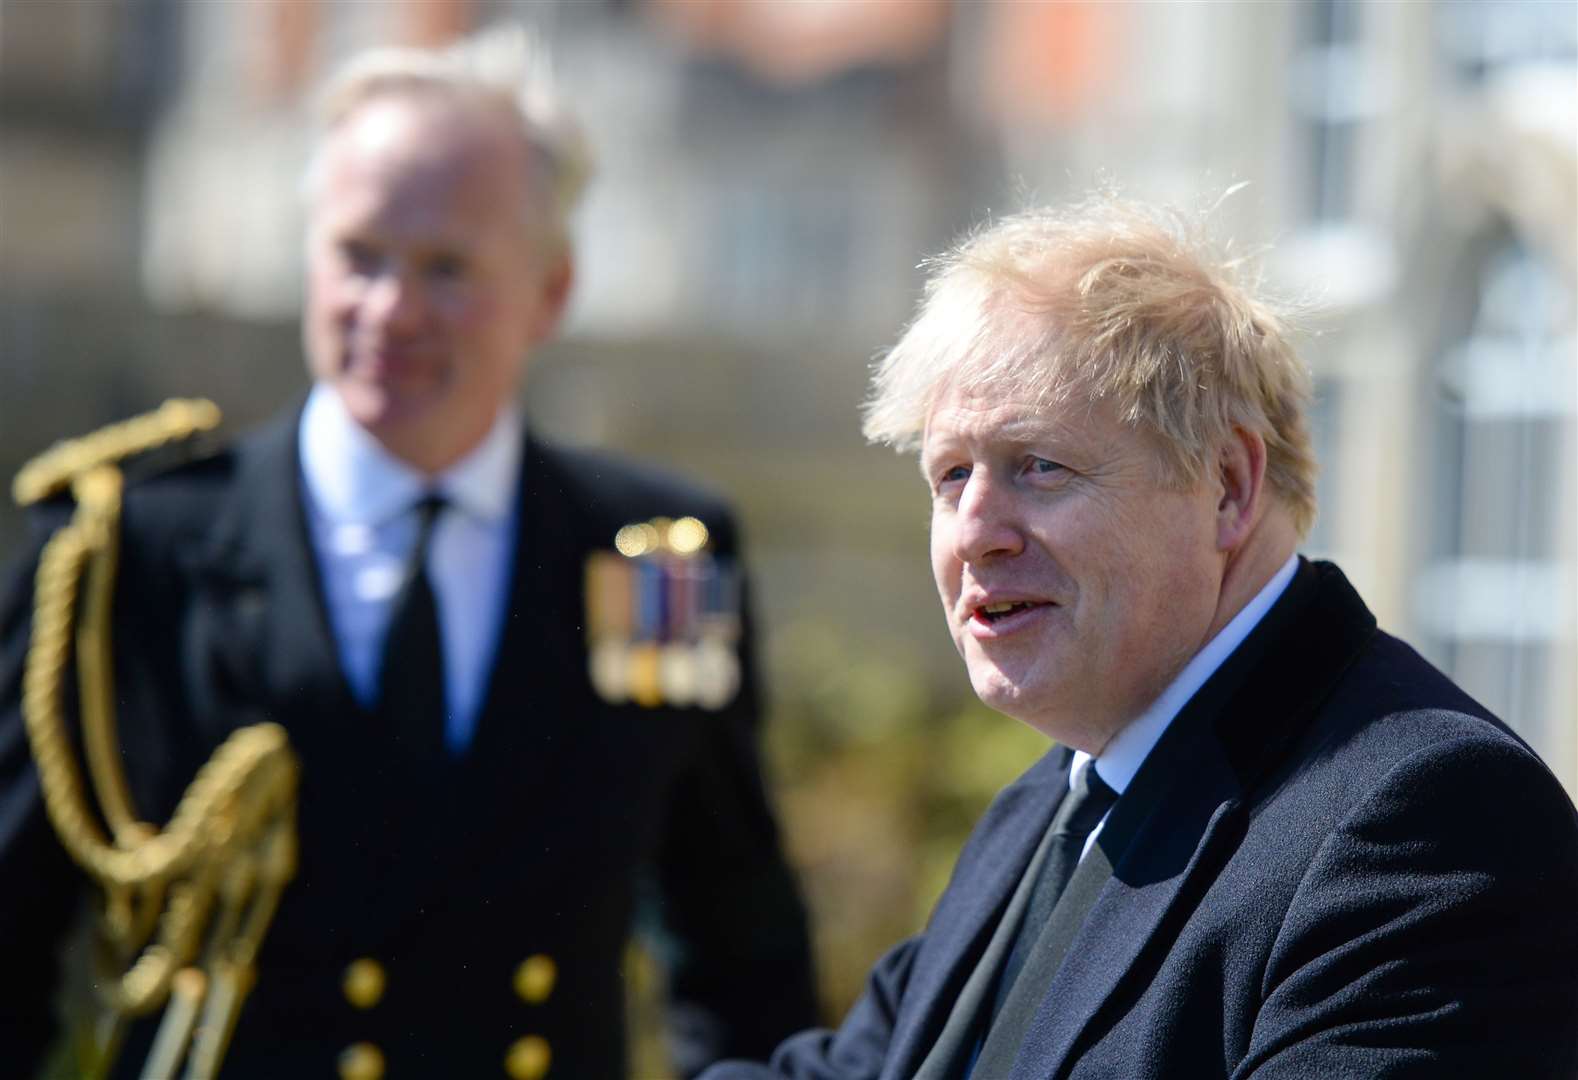 Prime Minister Boris Johnson still intends to travel to India this month, according to No 10 (Finnbarr Webster/PA)